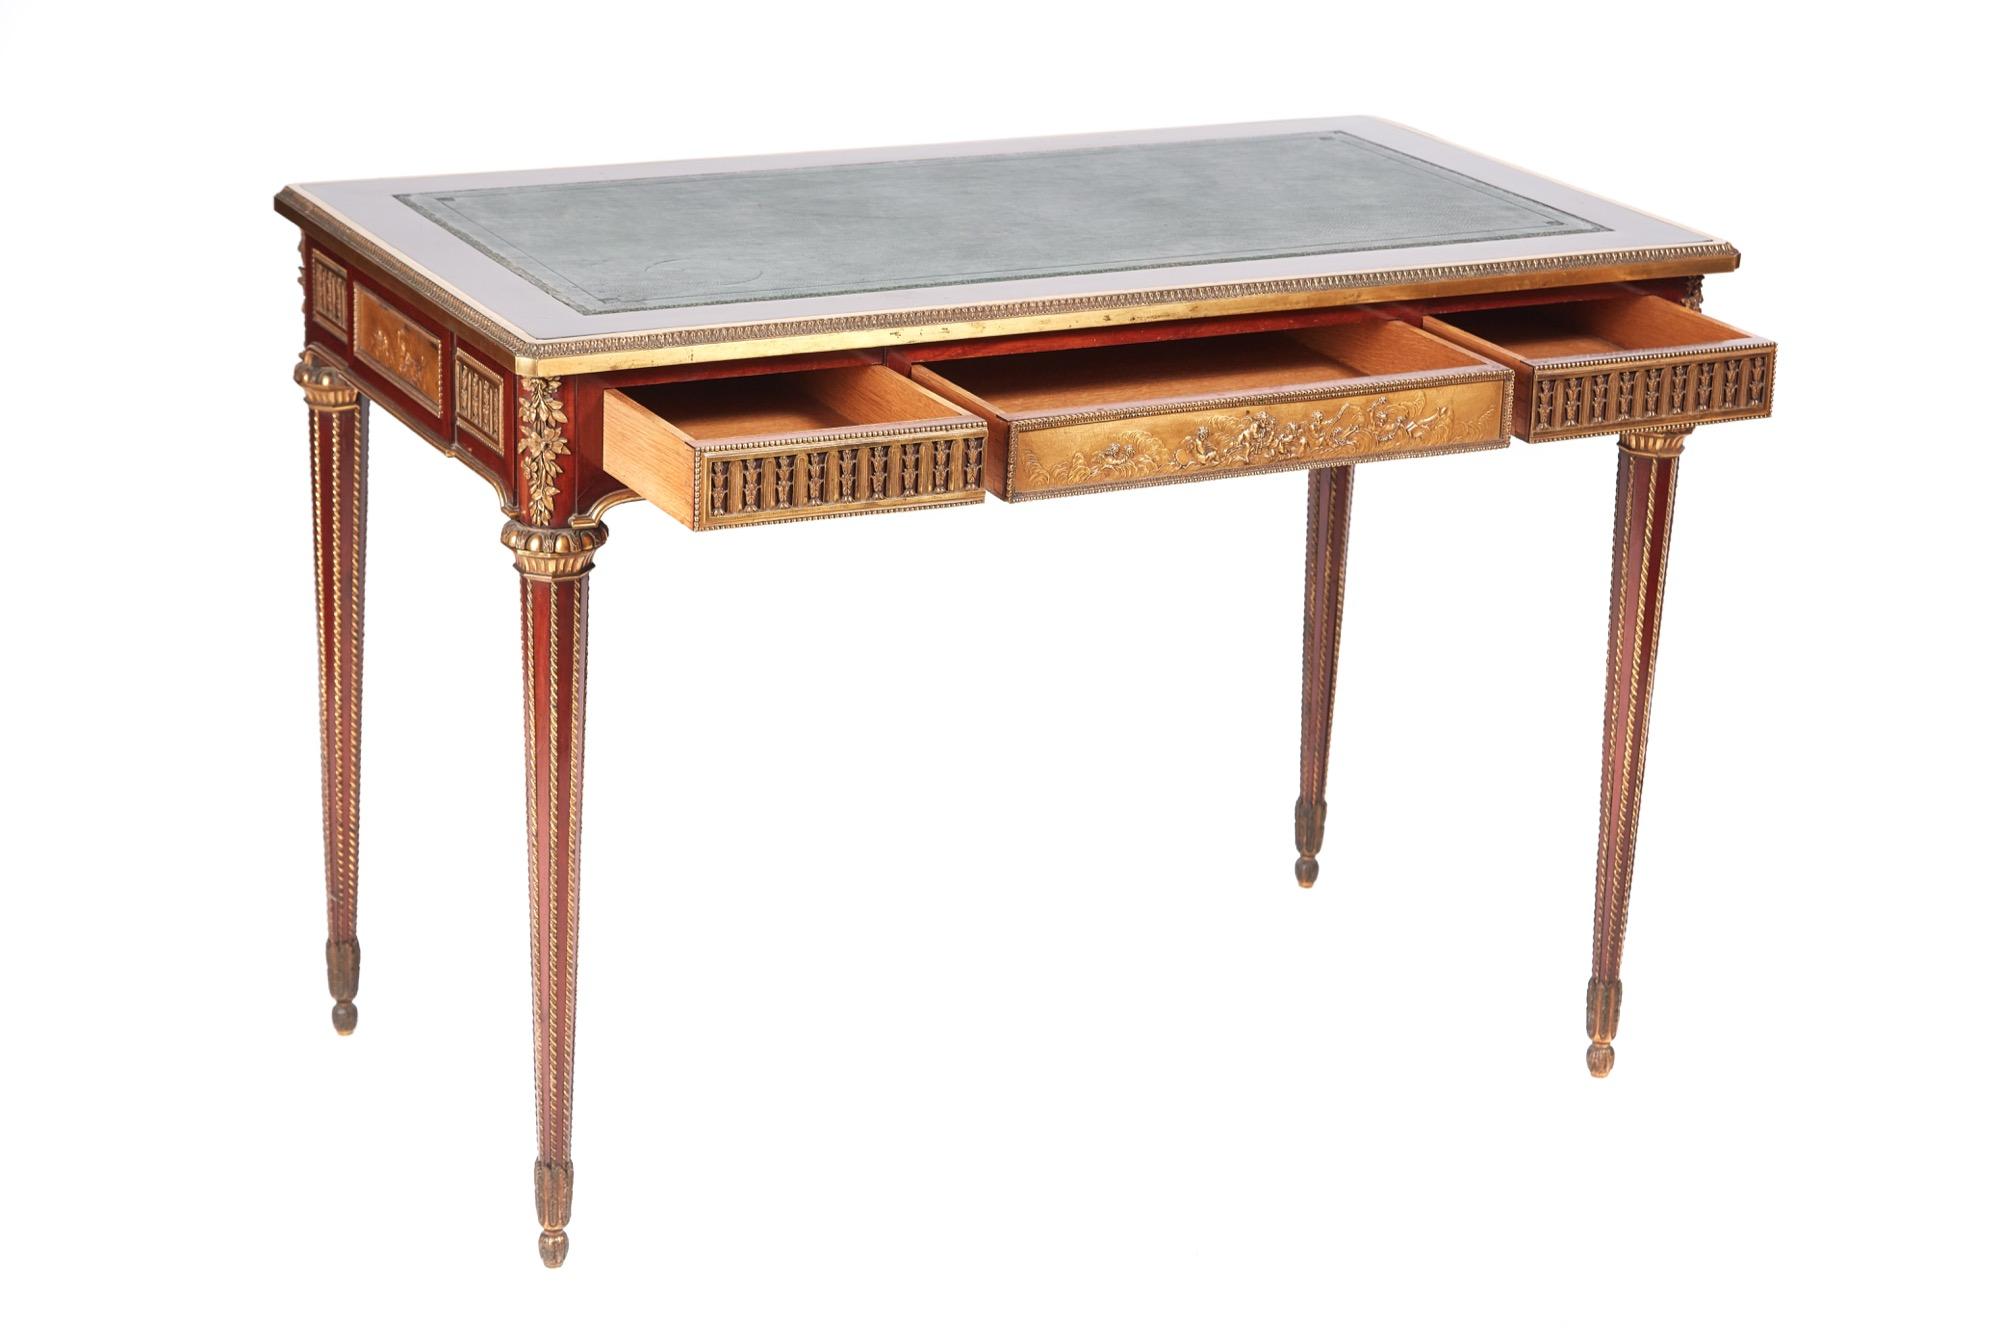 Important Louis XV1 style writing table [Bureau Plat] exhibition quality, firmly attributed to Holland & sons. The Earl of Sefton at Croxteth hall, commissioned Holland & sons circa 1860 to make Marie Antoinettes writing table [Bureau Plat] to the